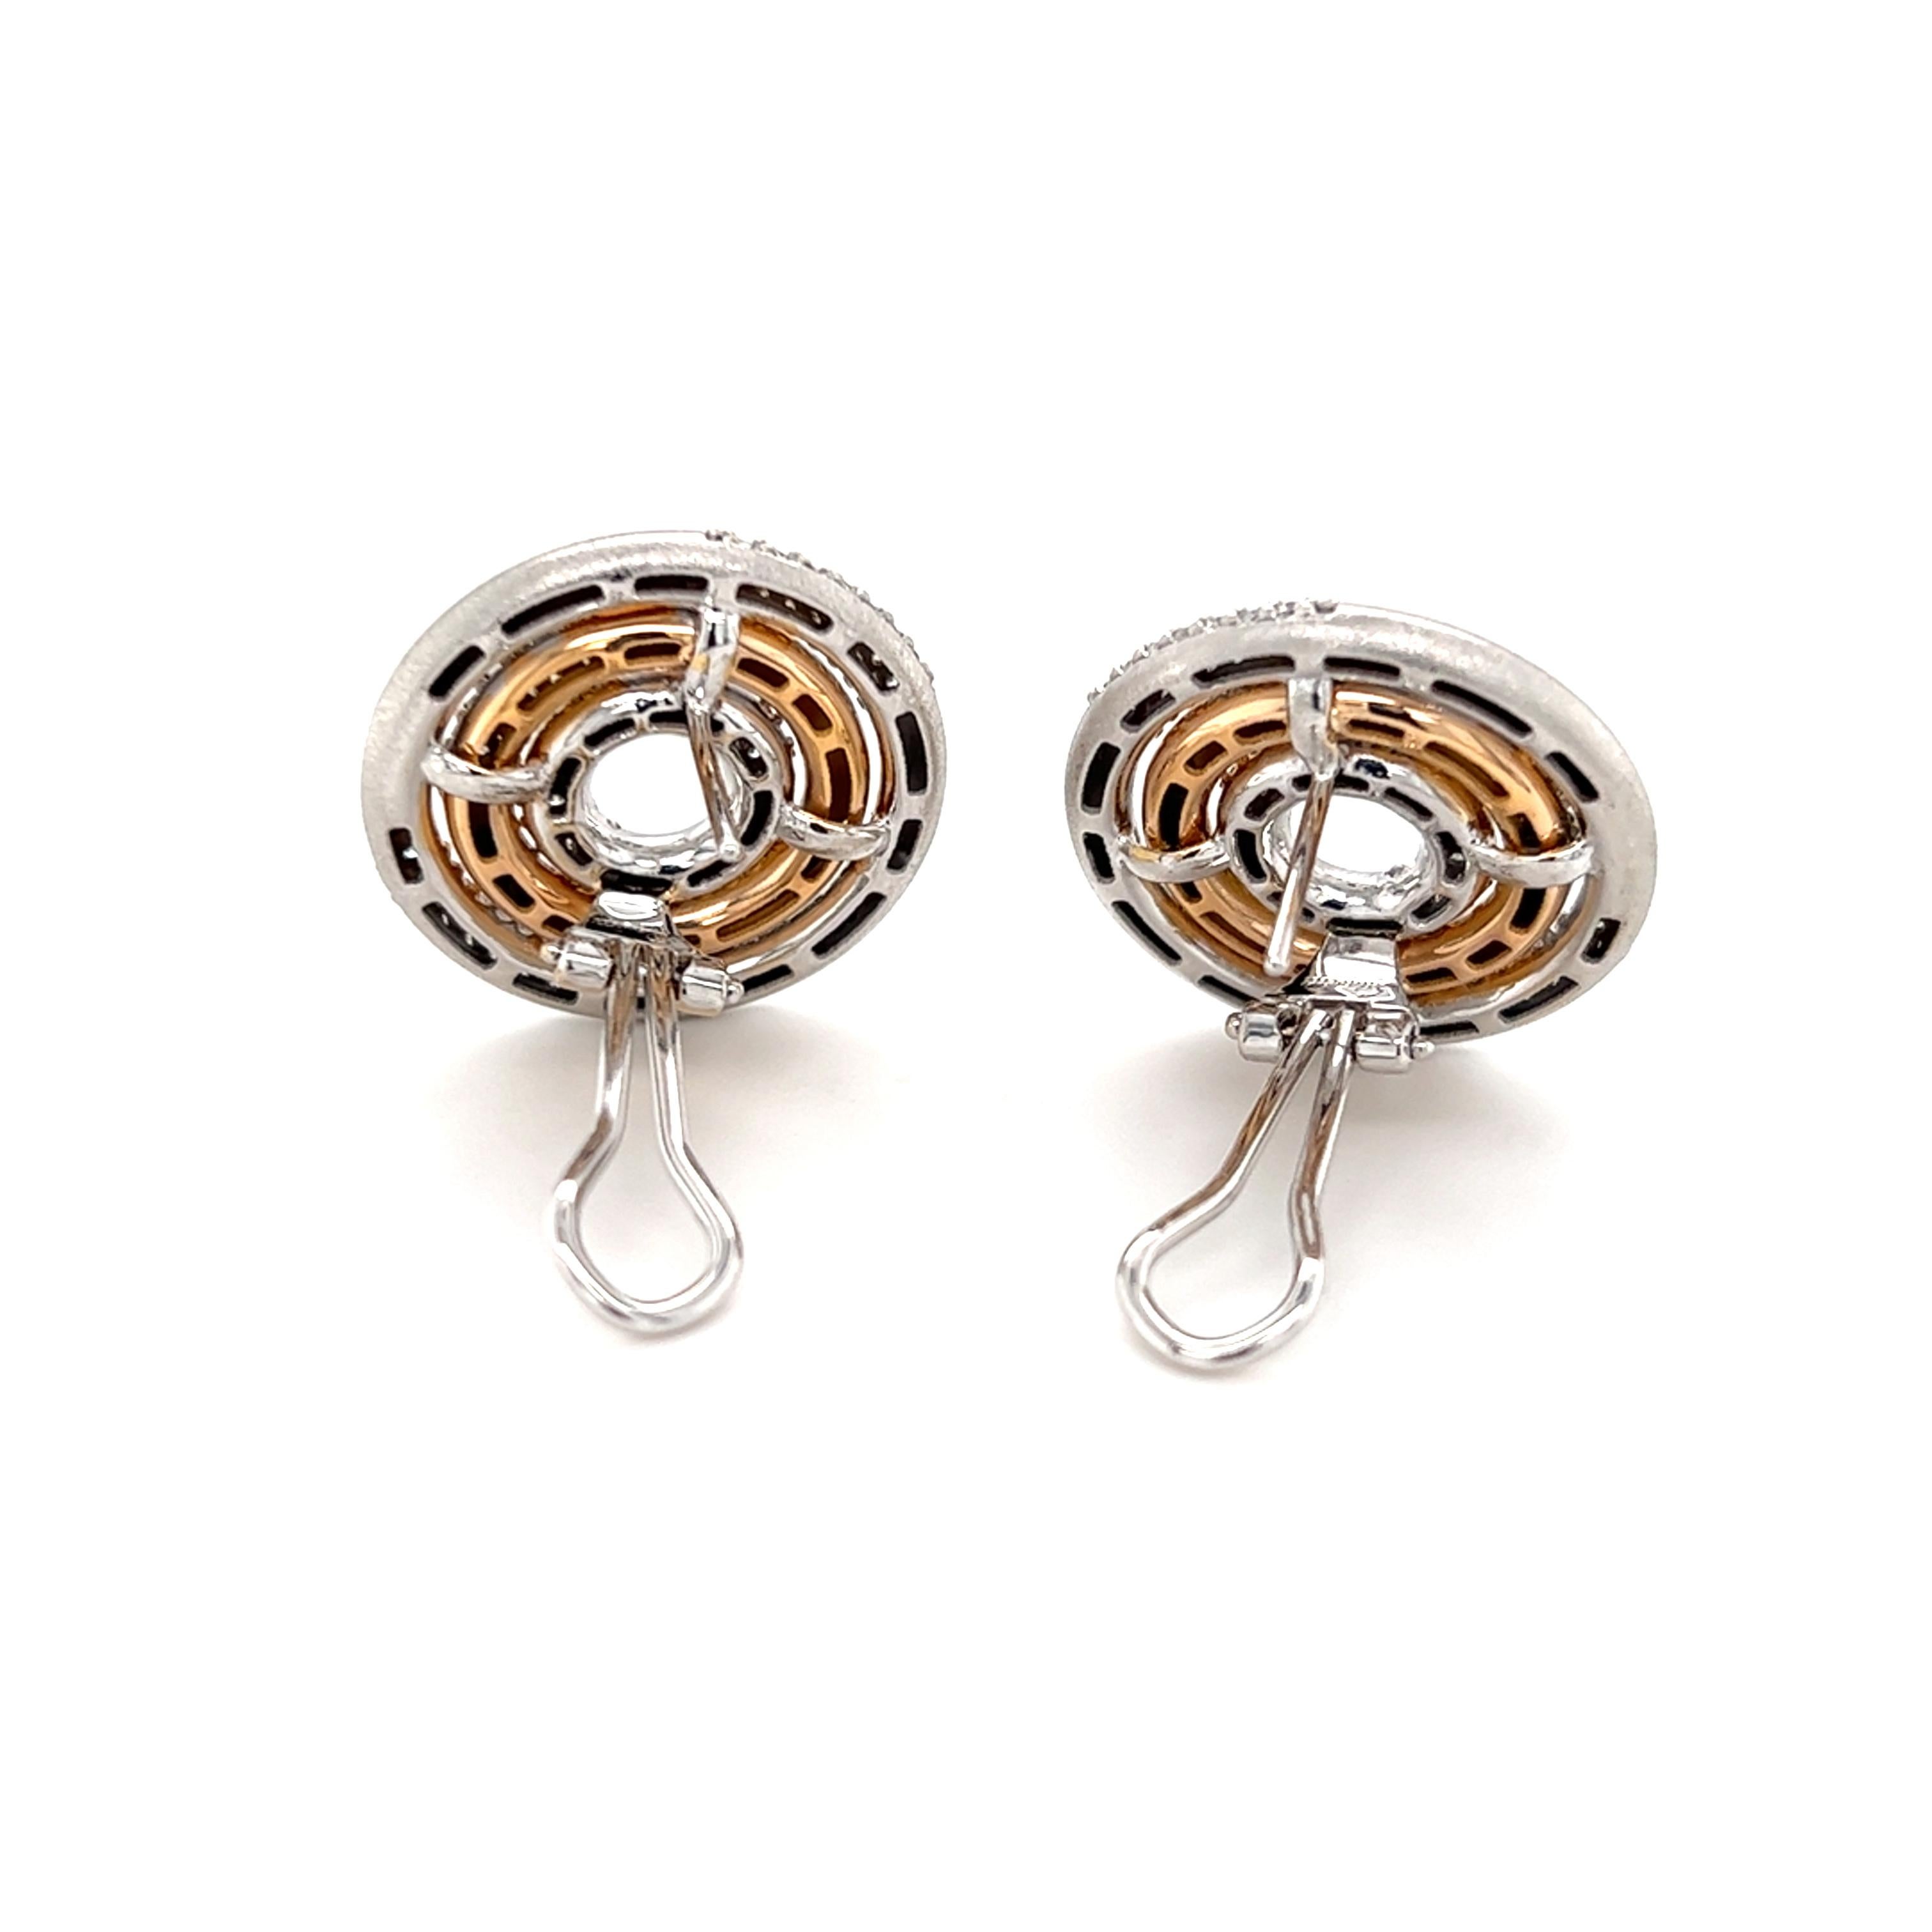 One pair of 18 karat rose and white gold multi-circle earrings by Salavetti, set with thirty (30) brown diamonds, approximately 0.30-carat total weight, and fifty-five (55) brilliant cut diamonds, approximately 0.55-carat total weight with matching